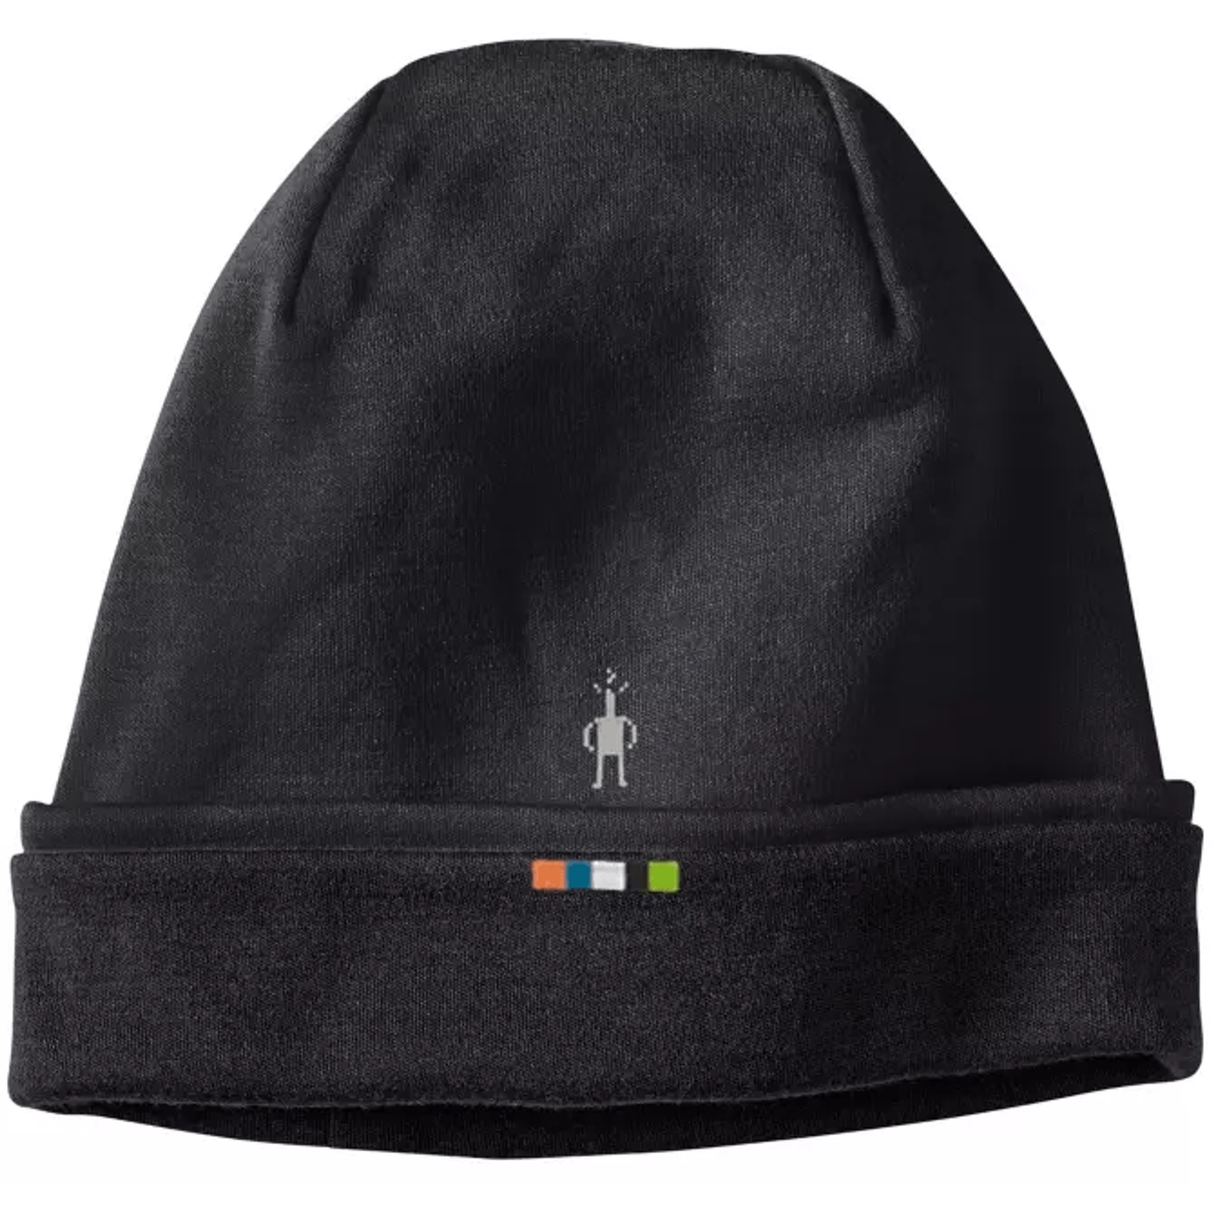 Smartwool Thermal Merino Reversible Cuffed Beanie  -  One Size Fits Most / Charcoal